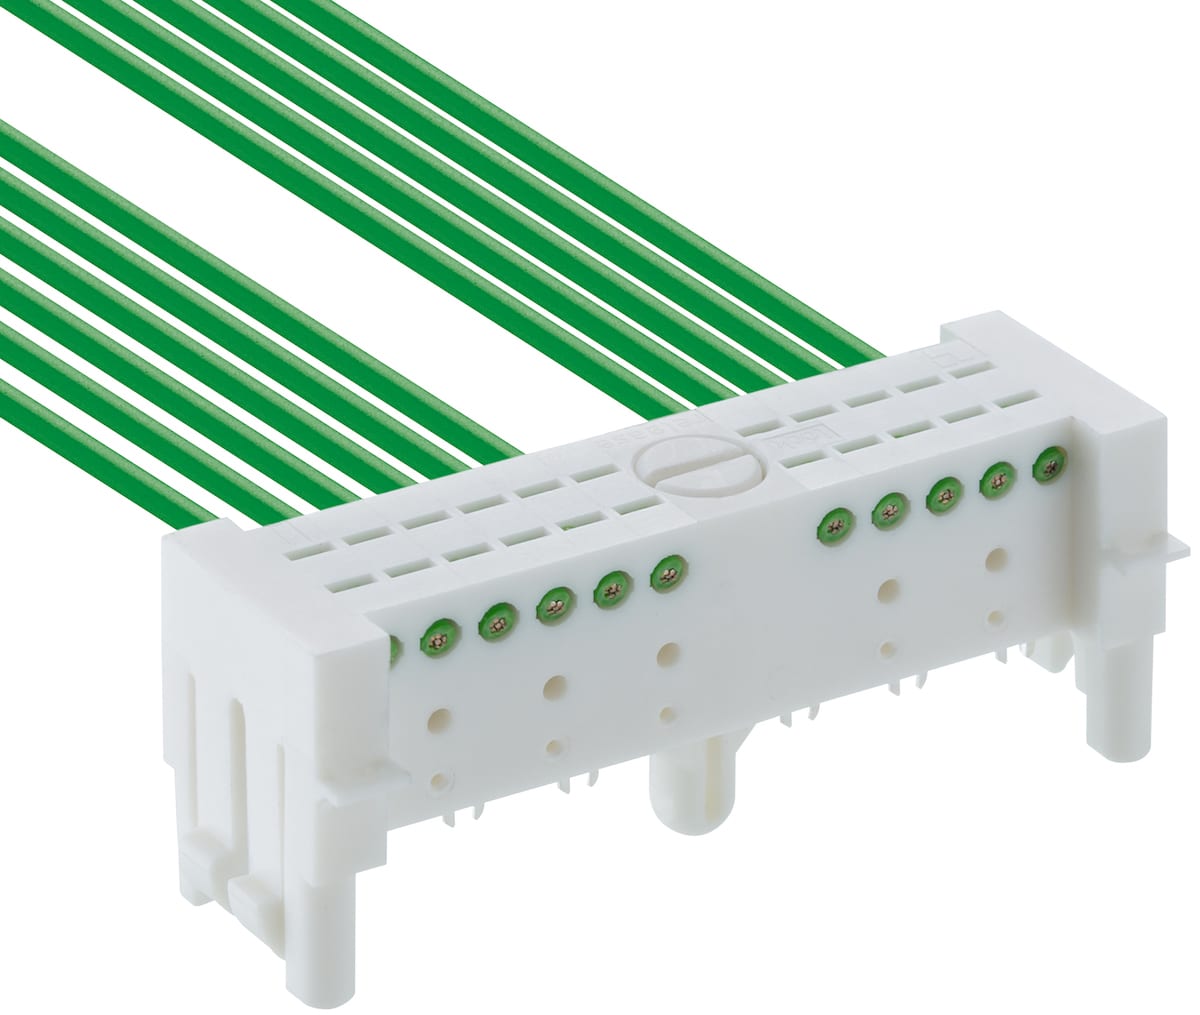 Lumberg introduced new SmartSKEDD direct connectors